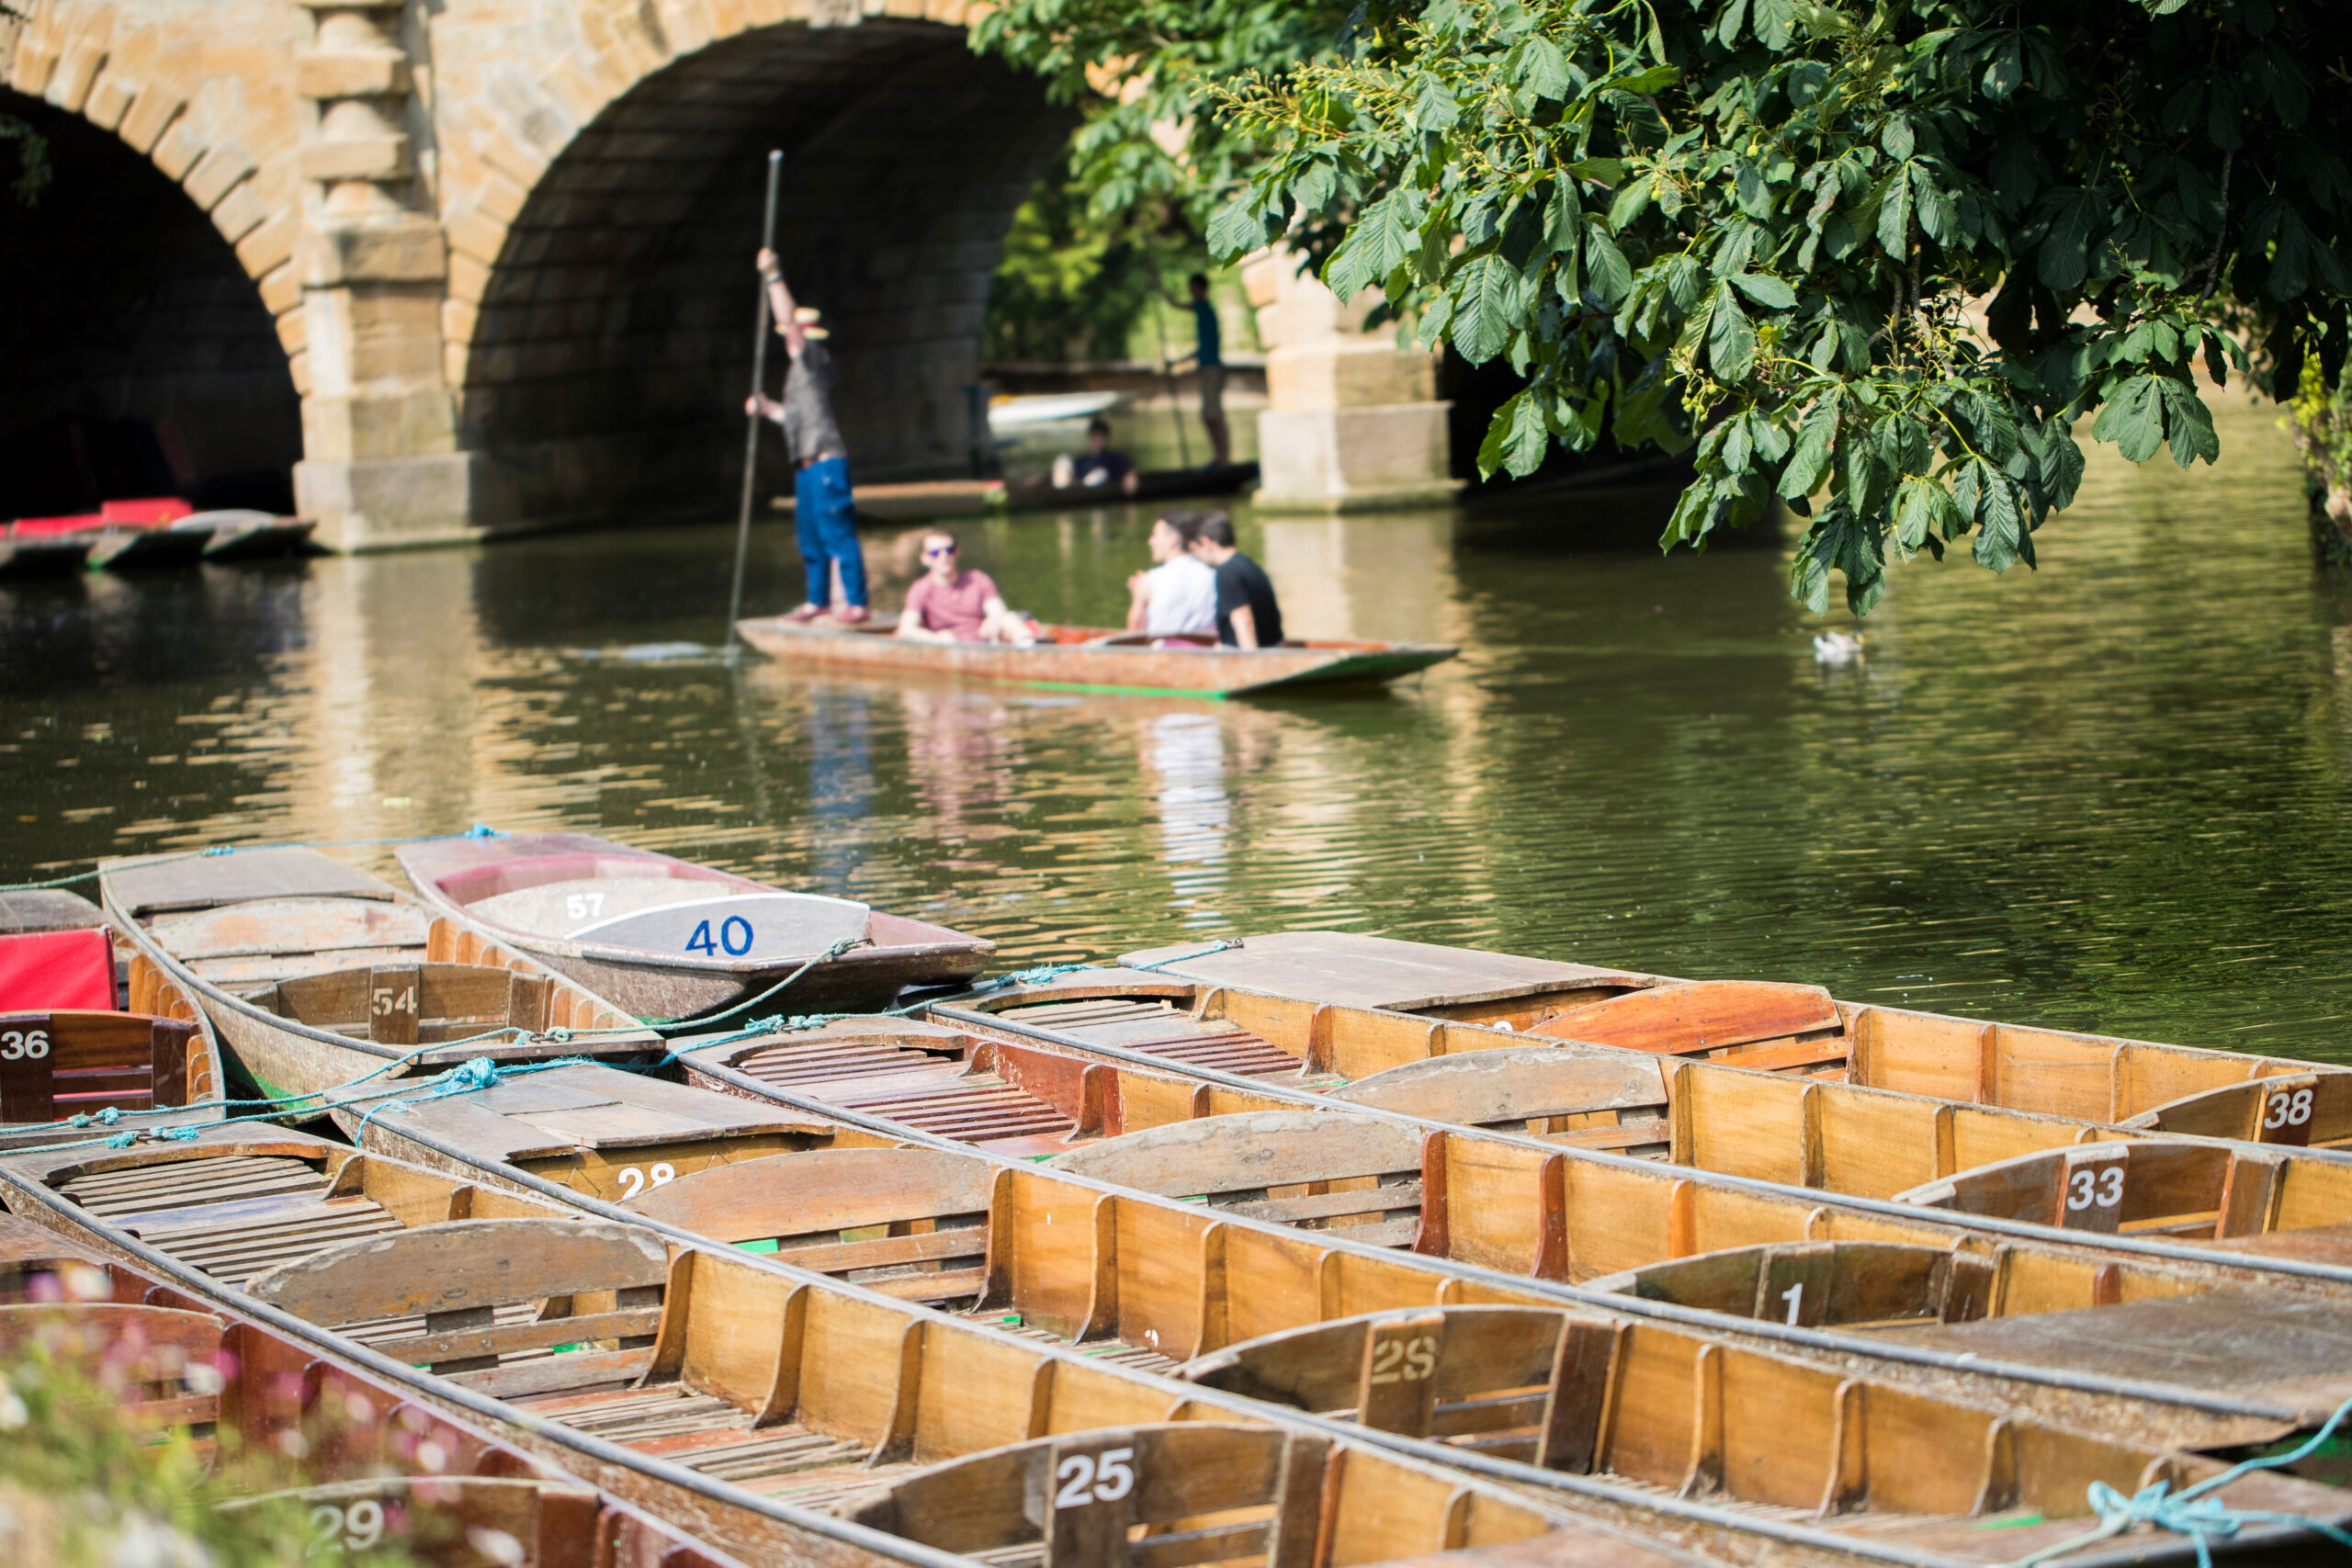 5 Family-Friendly Things To Do With Children In Oxford